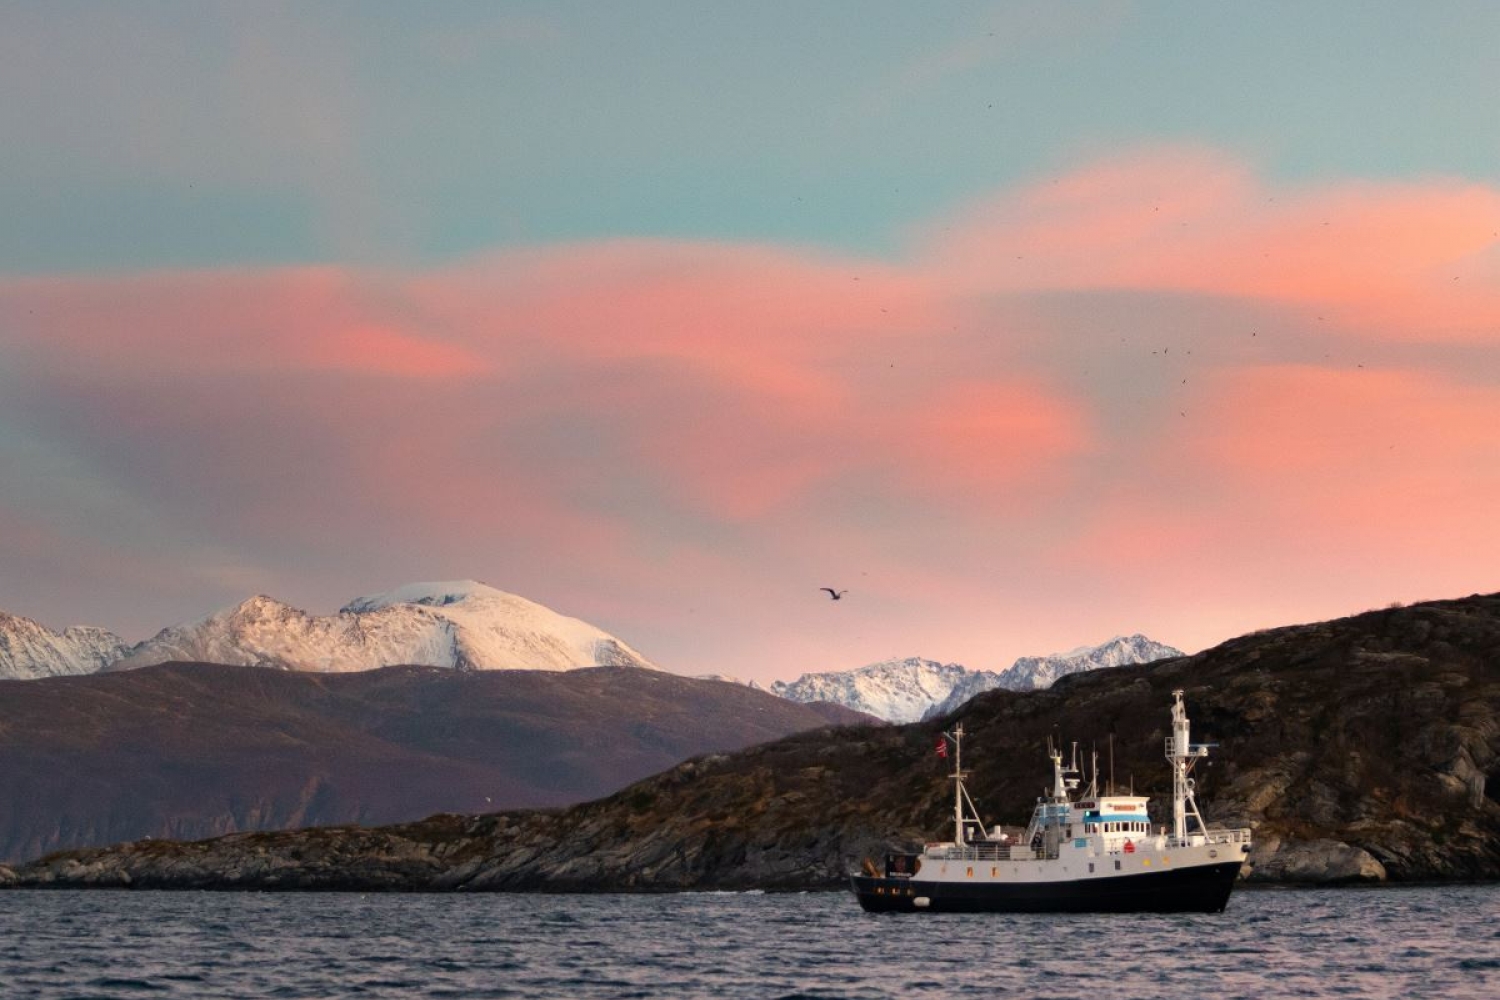 the boat in beautiful surroundings with mountains, sea and pink clouds